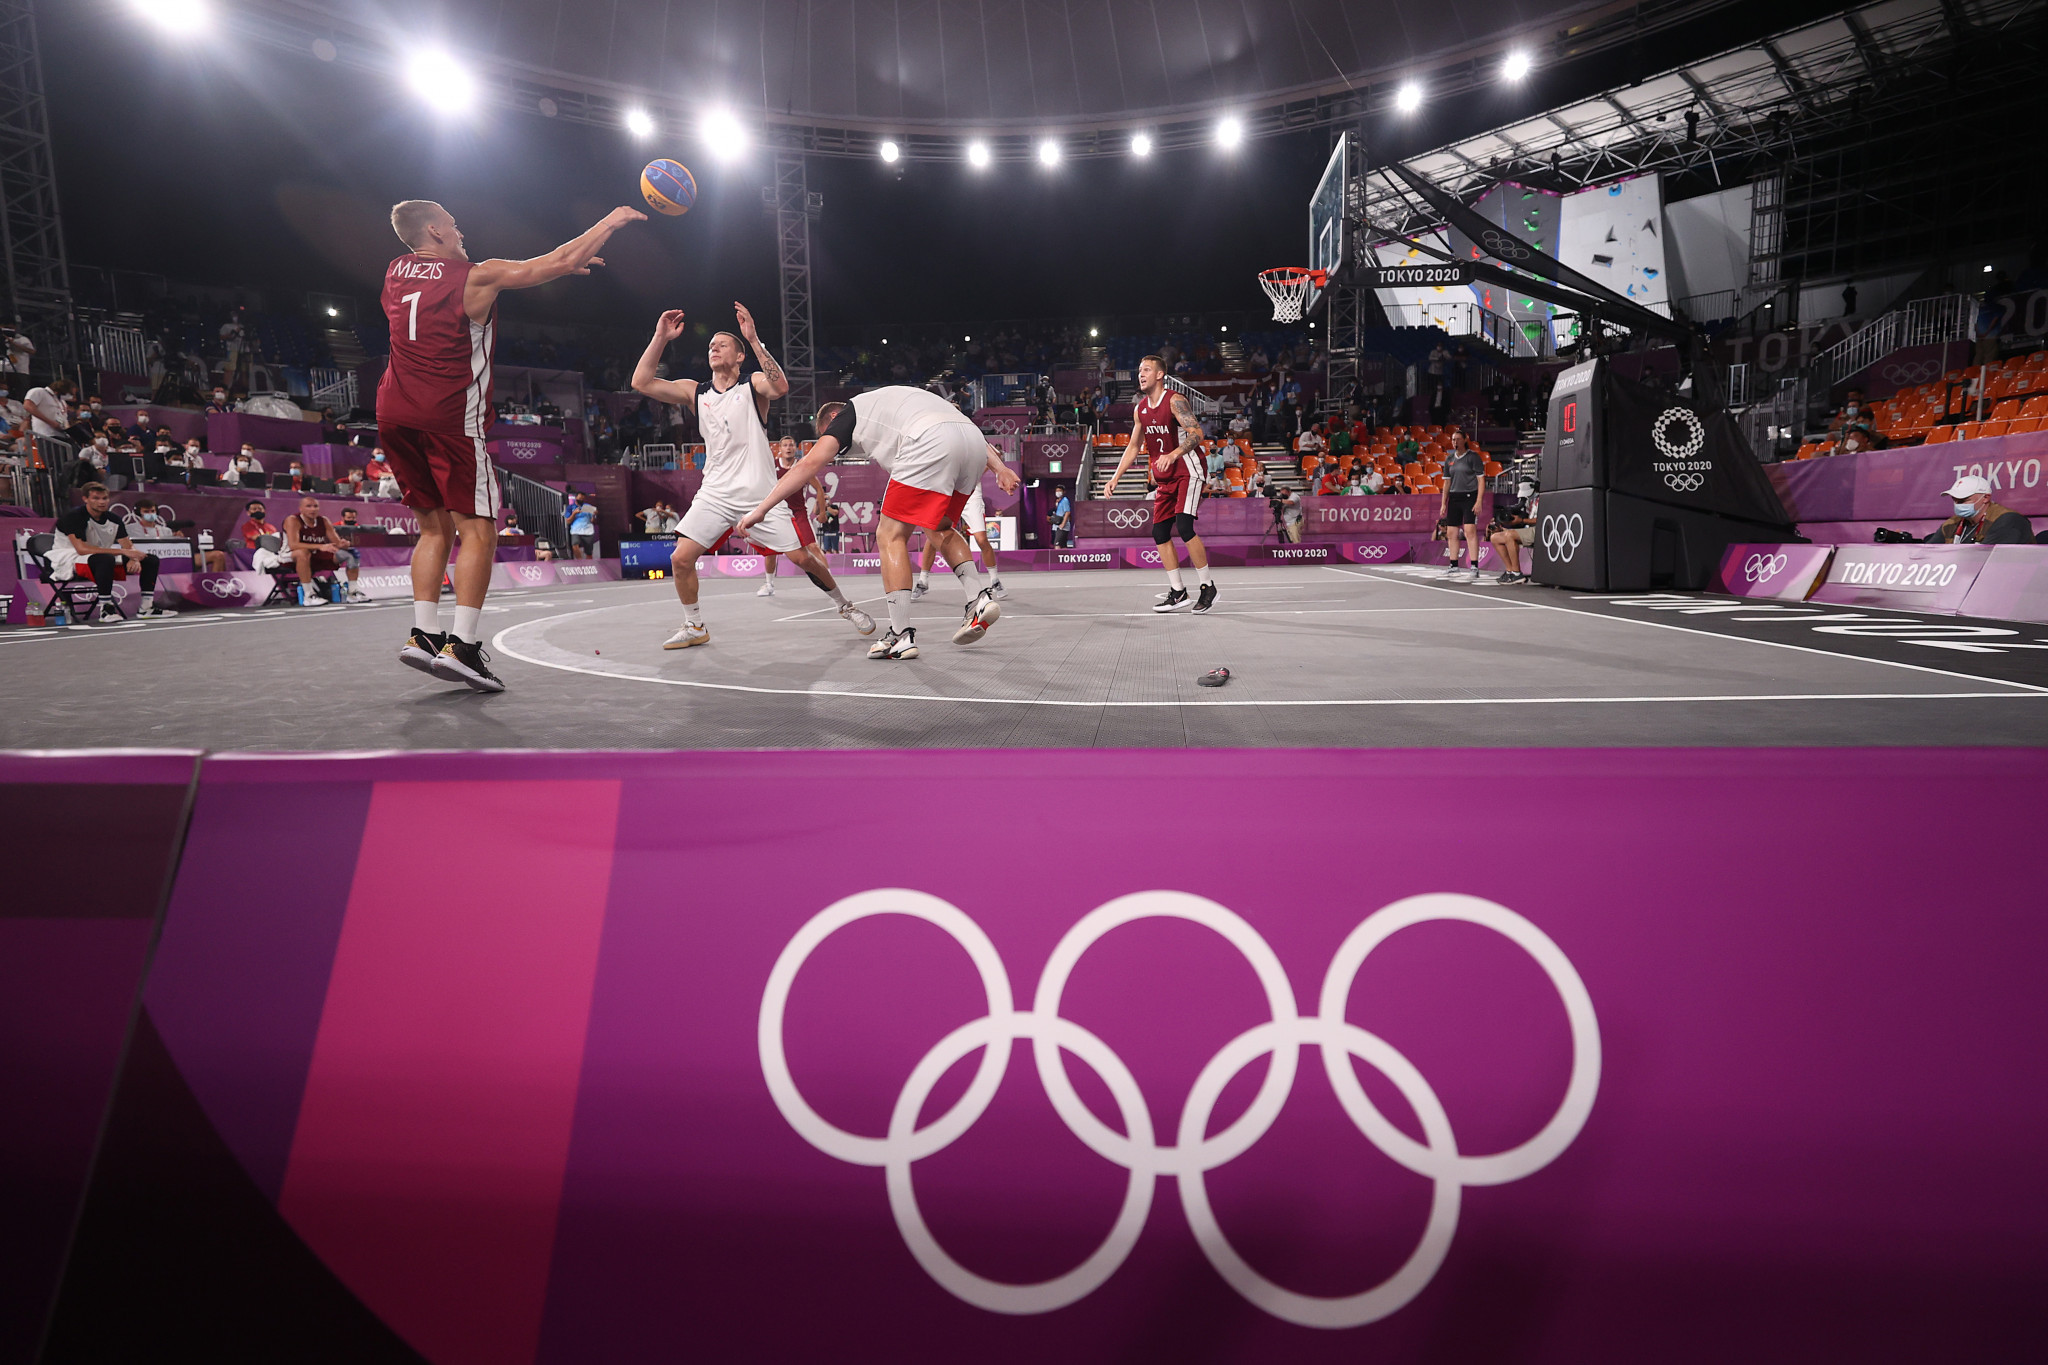 FIBA denies receiving interest from Hong Kong after reported withdrawal from Paris 2024 3x3 qualifier